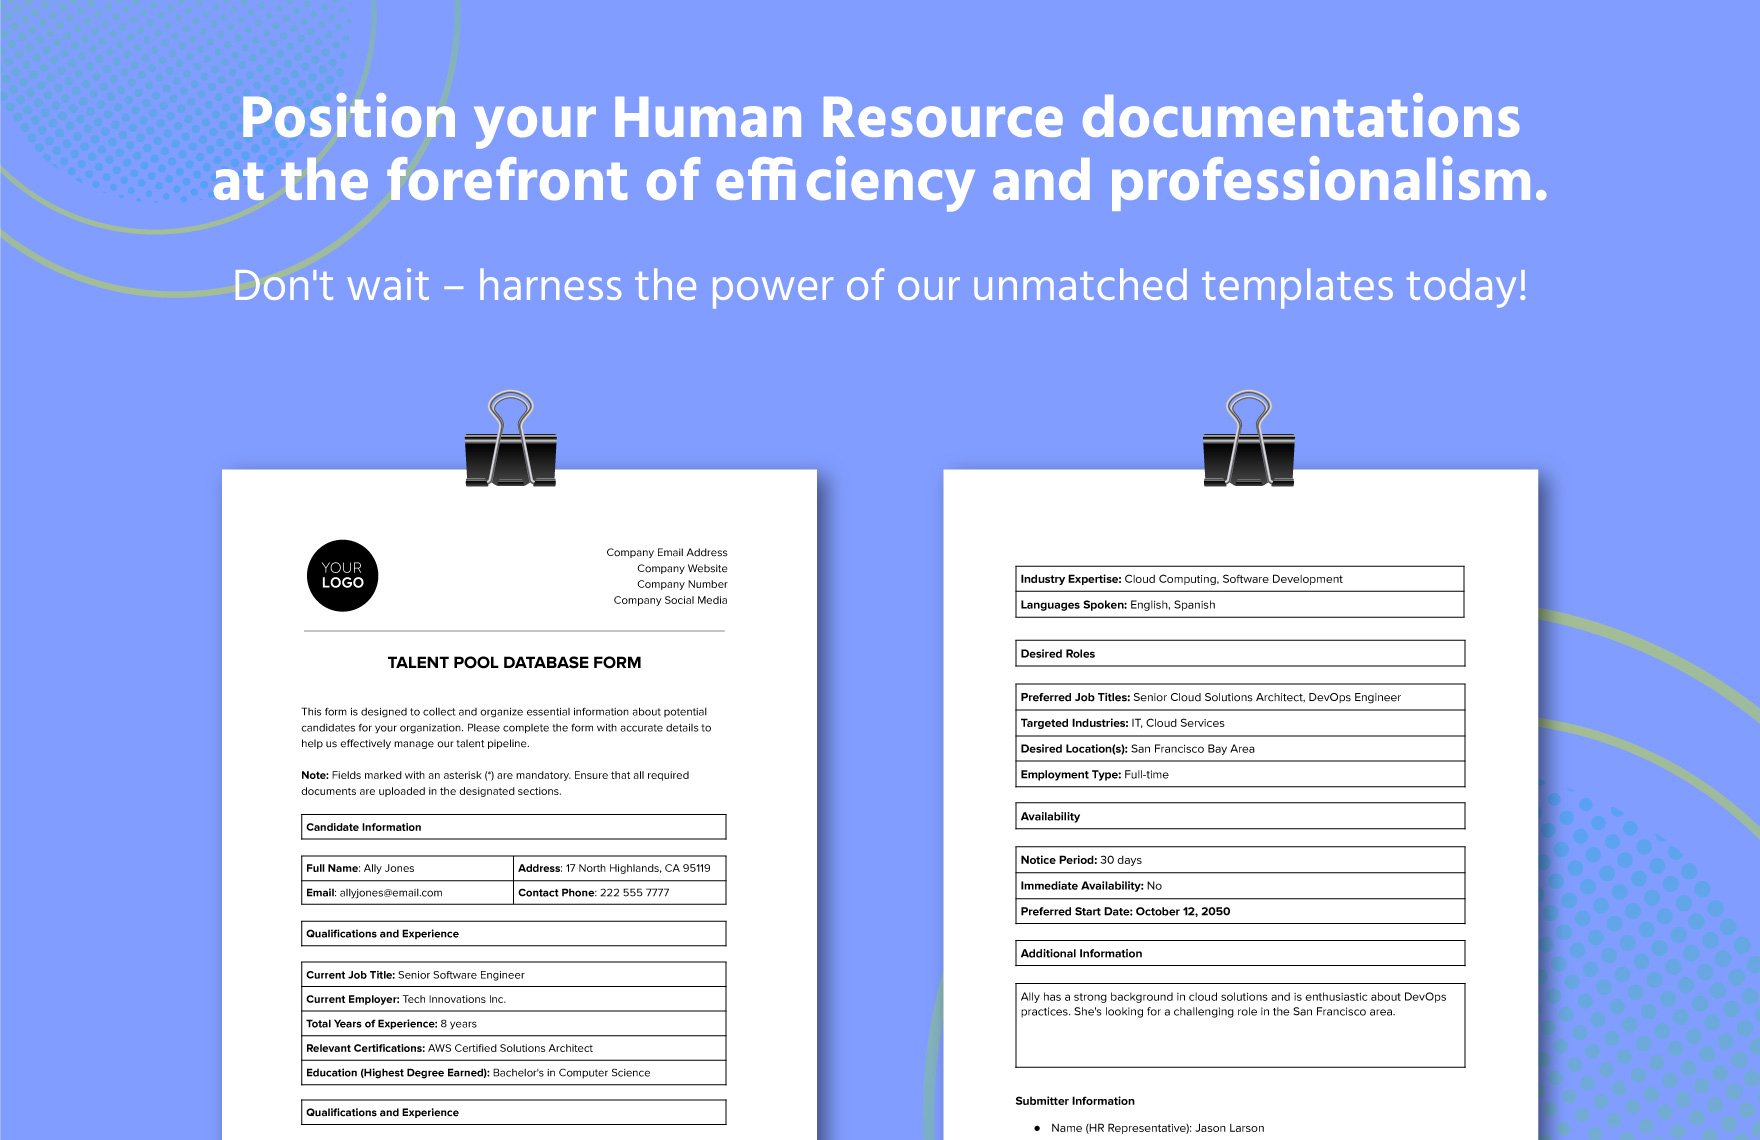 Talent Pool Database Form HR Template